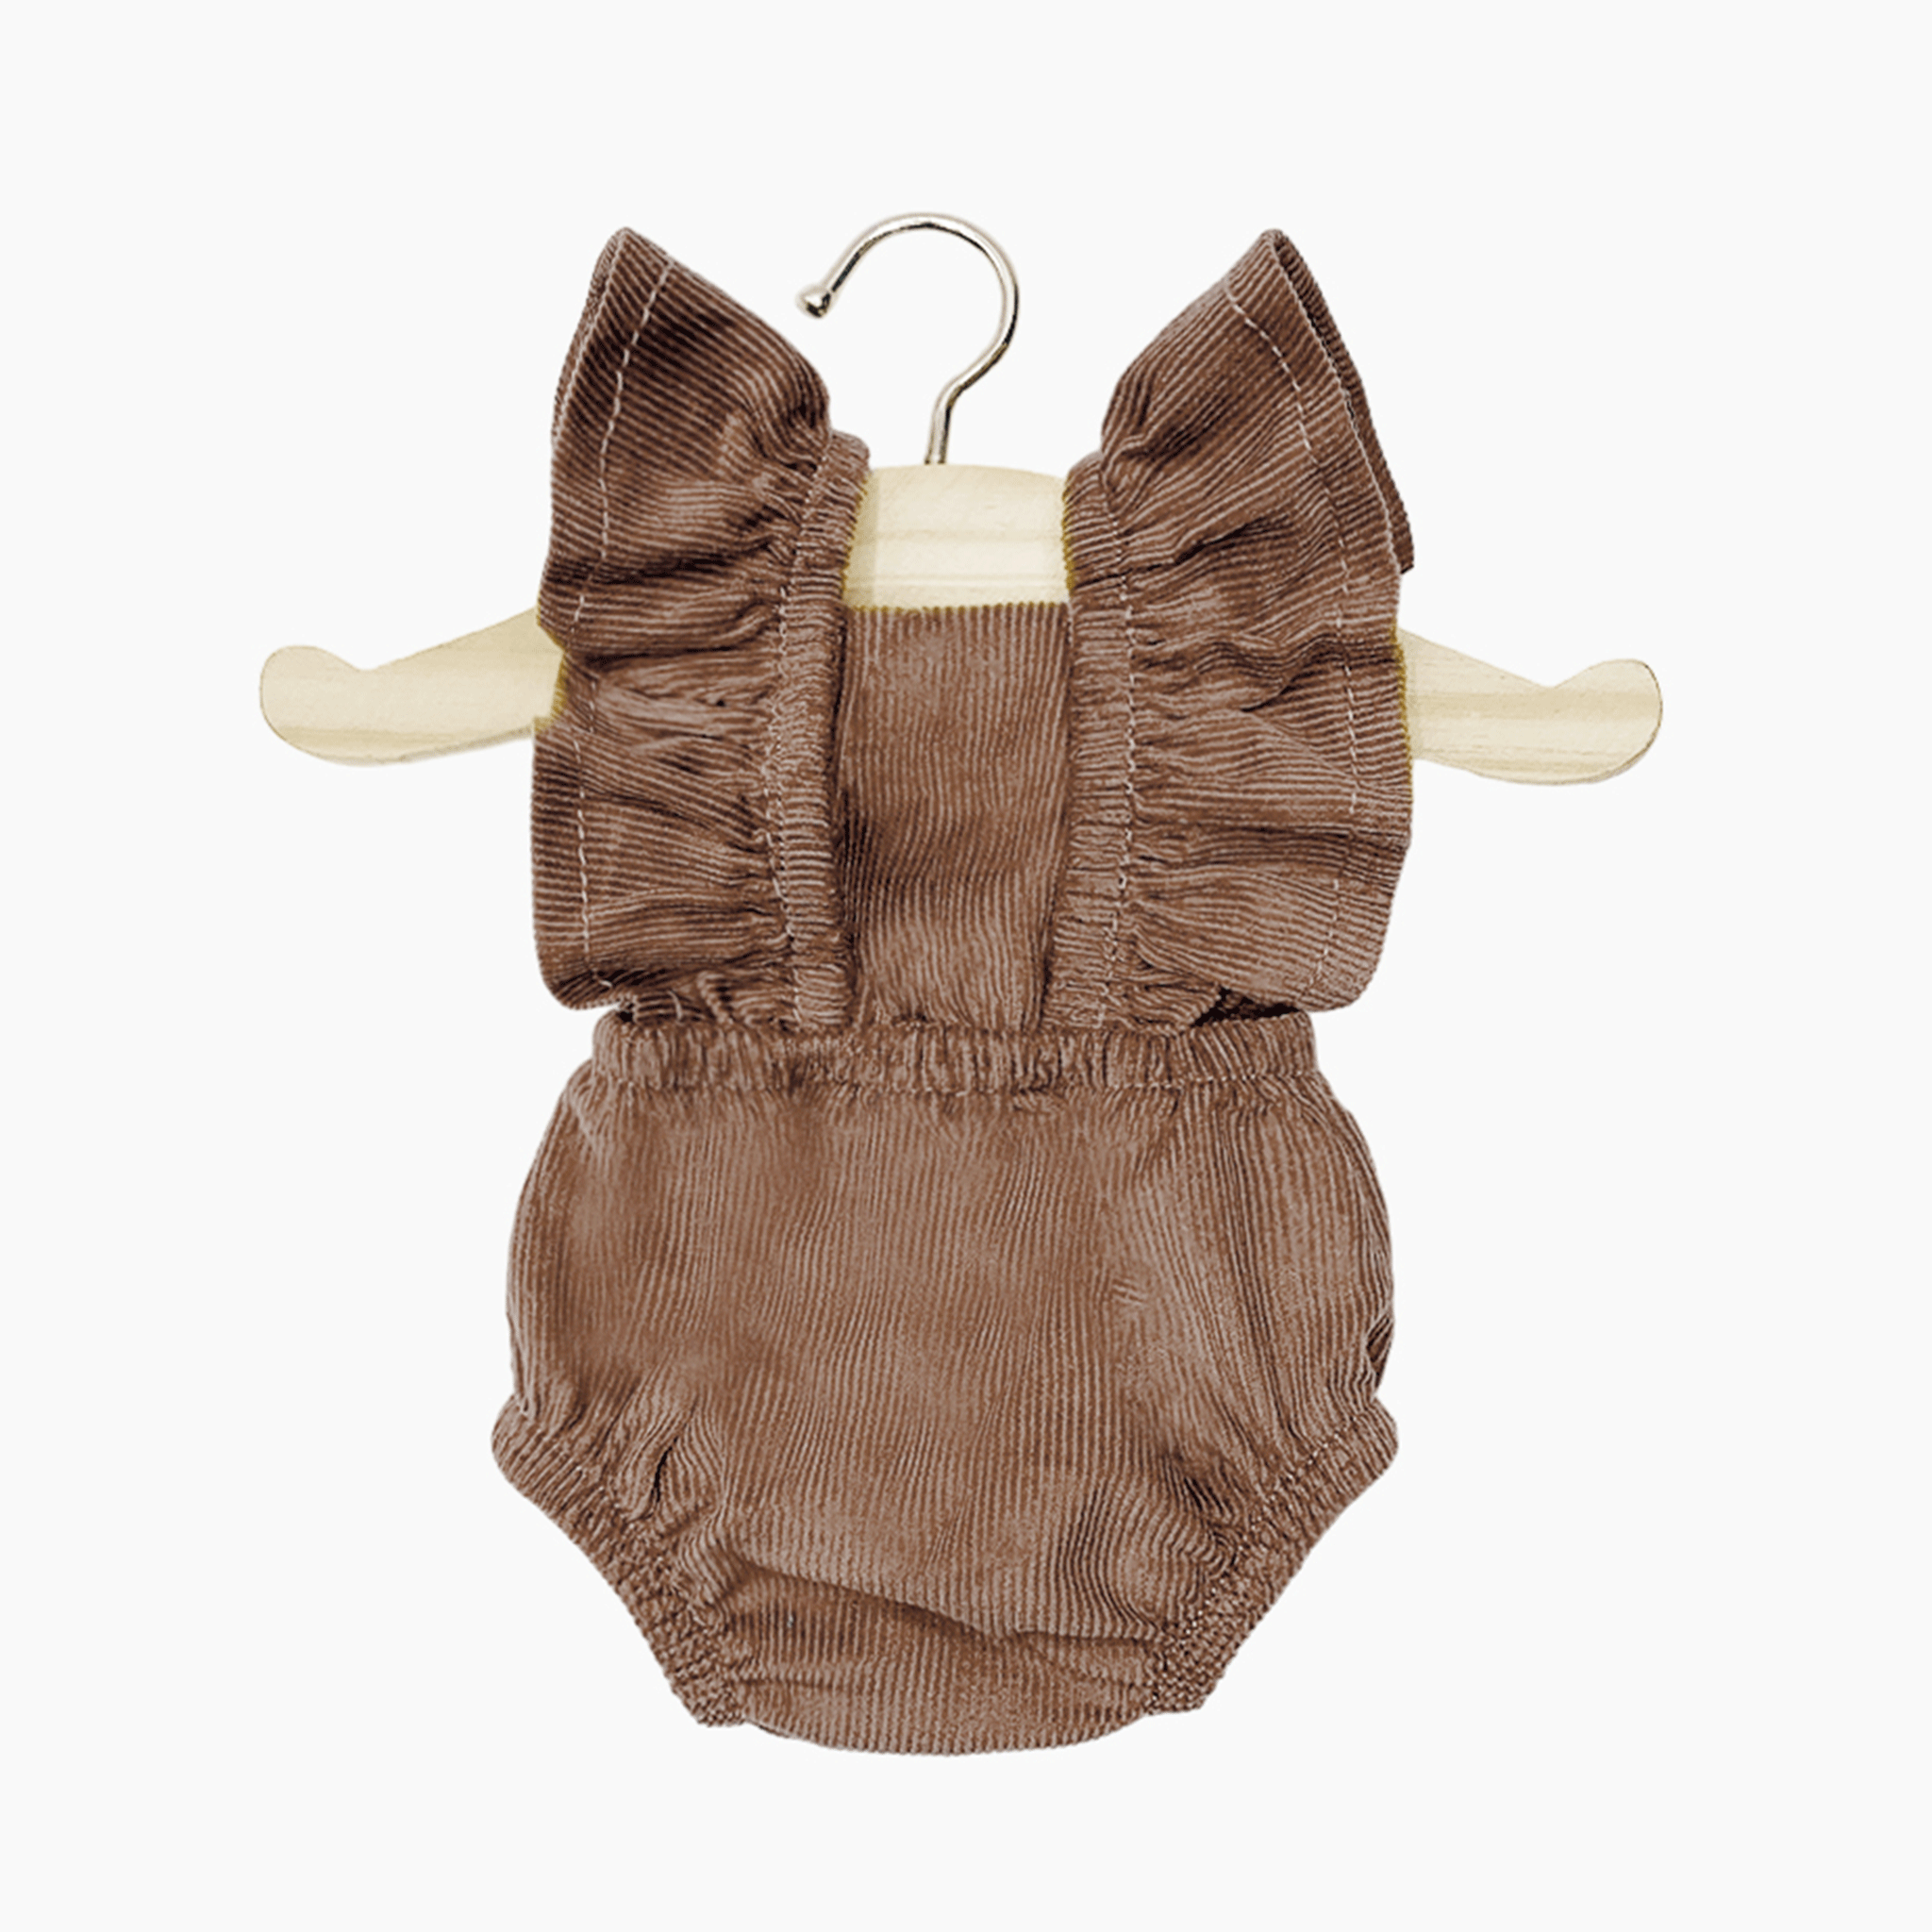 On a white background is a brown doll romper with a corduroy texture and ruffle sleeves. 